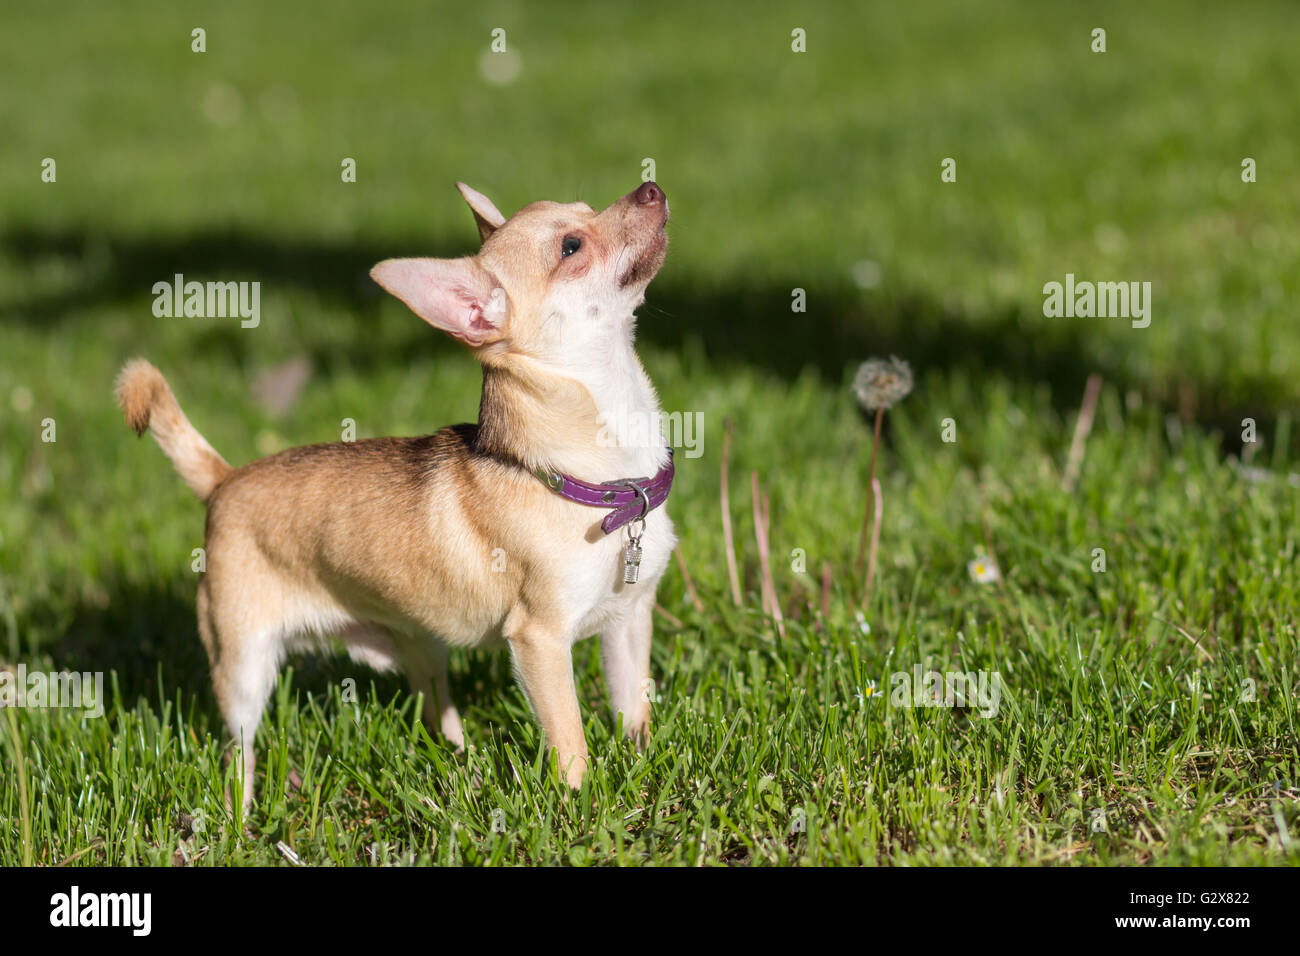 Chihuahua dog looking up grass field Banque D'Images